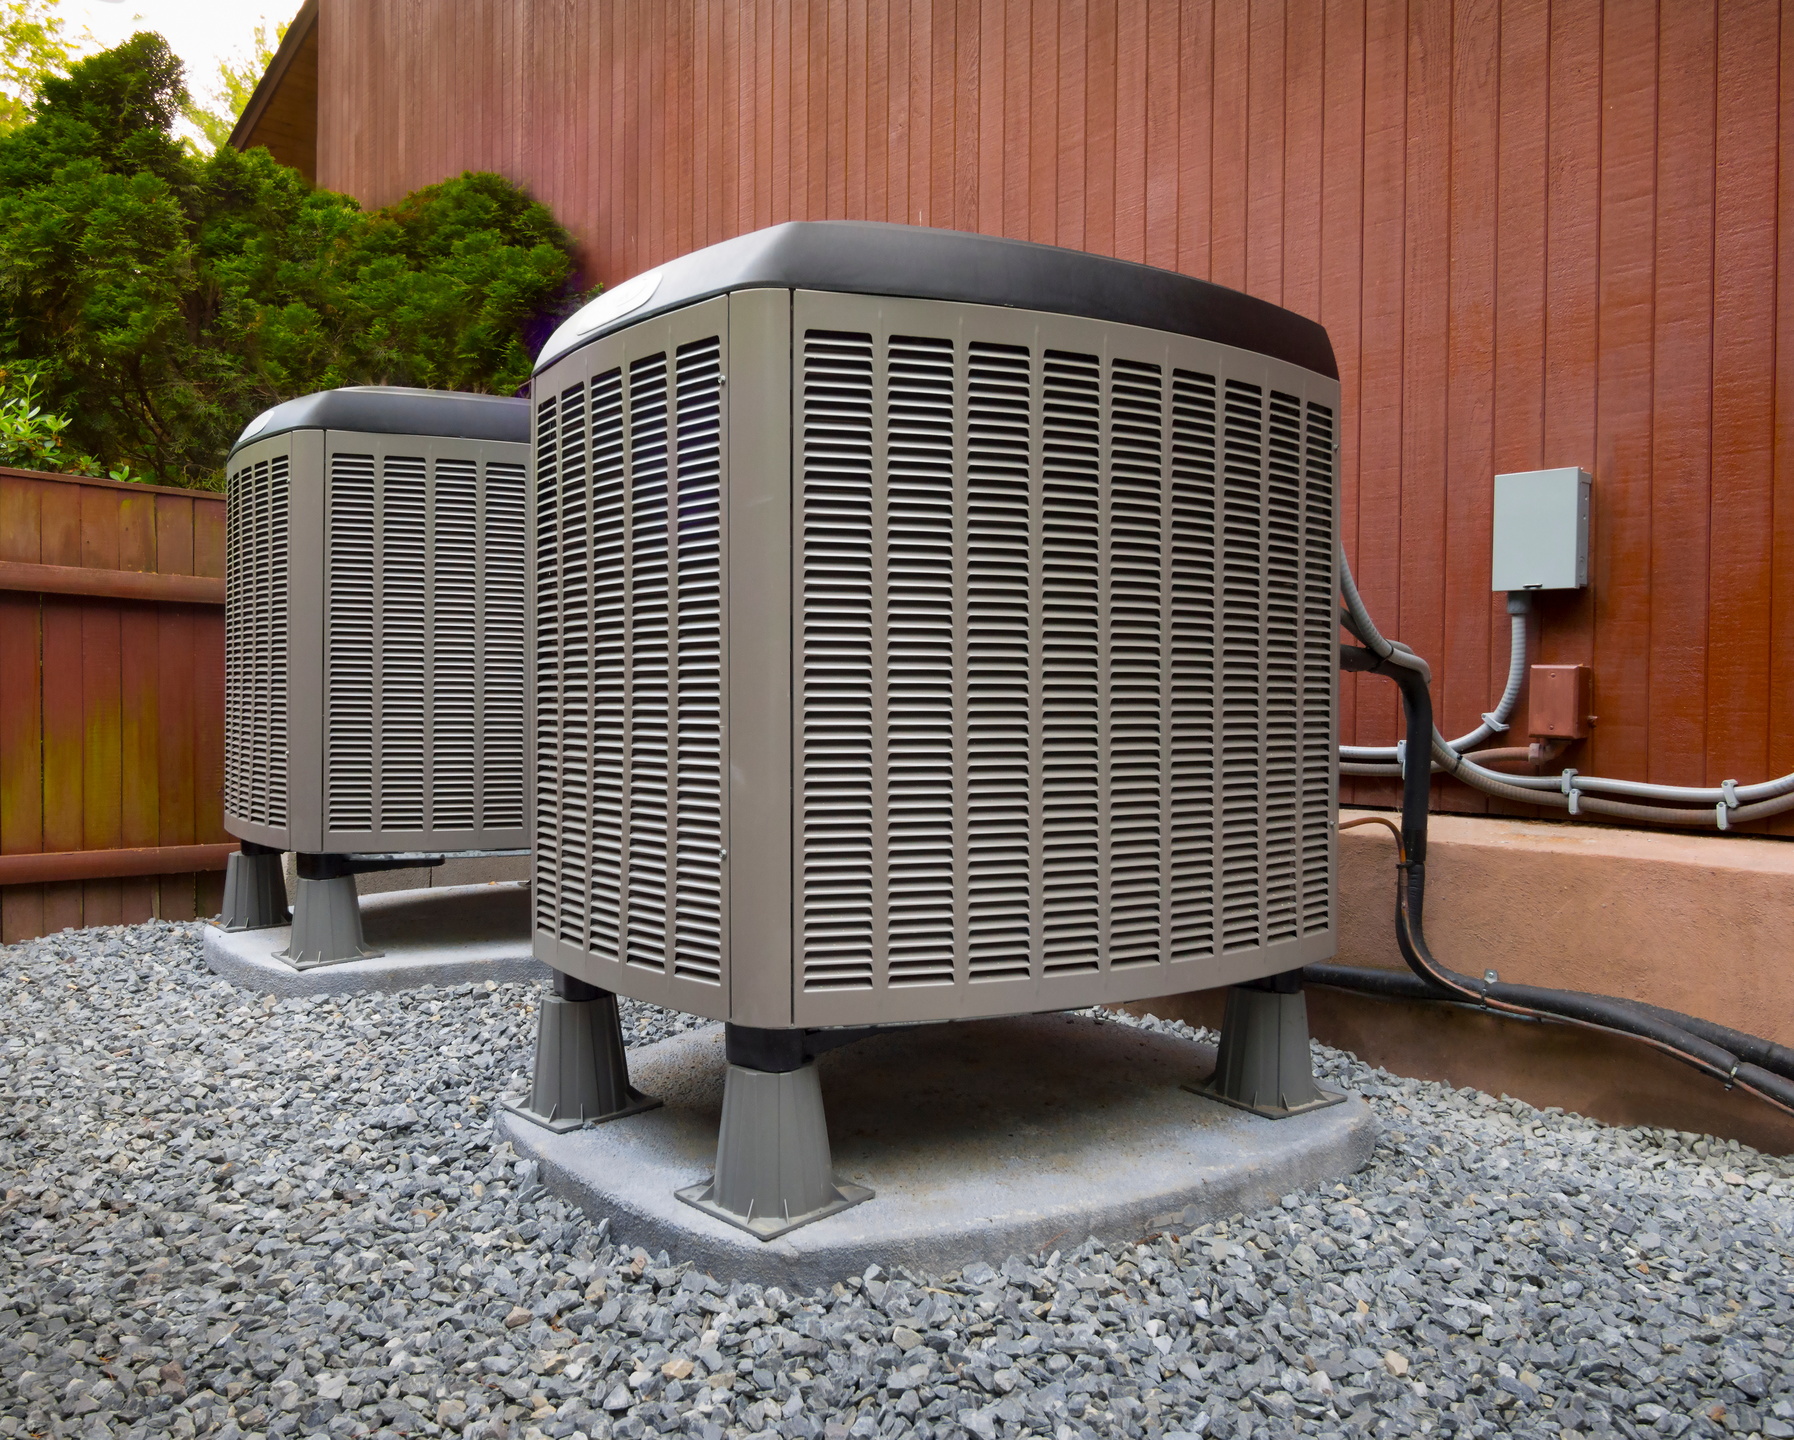 Air Conditioning Services In Irvine Ca